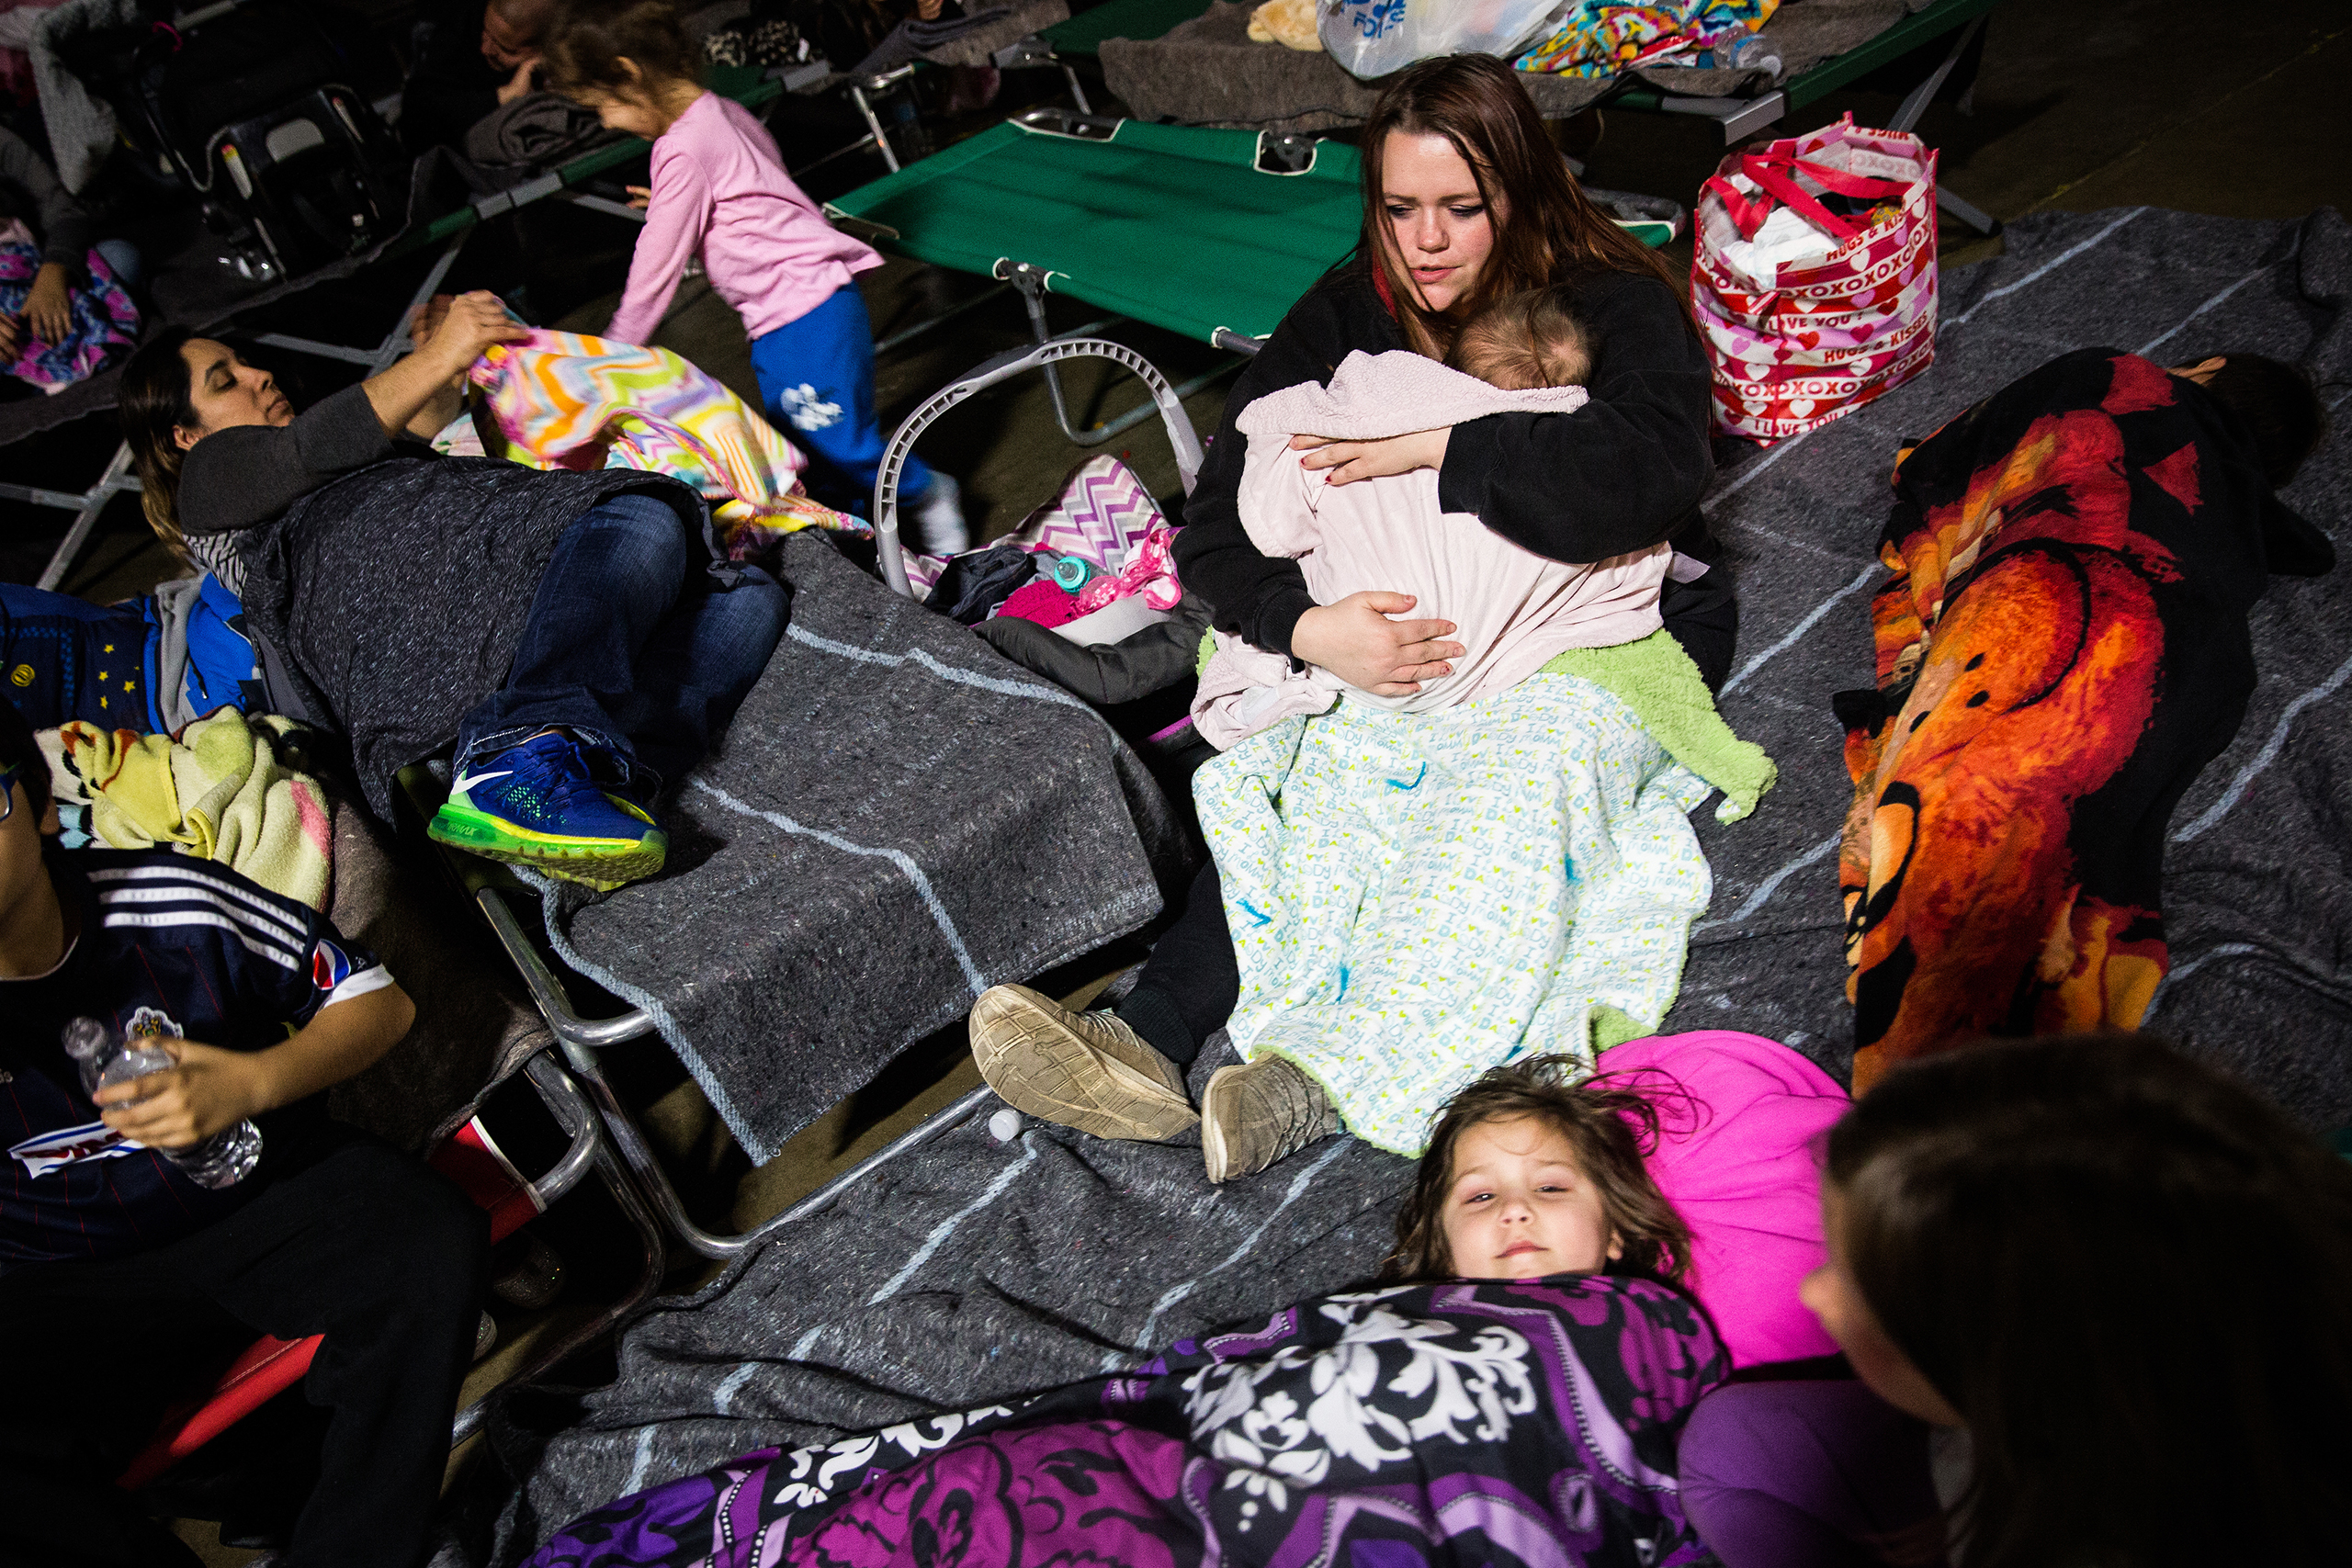 Gridley resident Shari Mota, right, tries to get her children to go to sleep in the evacuation center at the Butte County Fairgrounds in Chico, Calif., on Feb. 12, 2017.